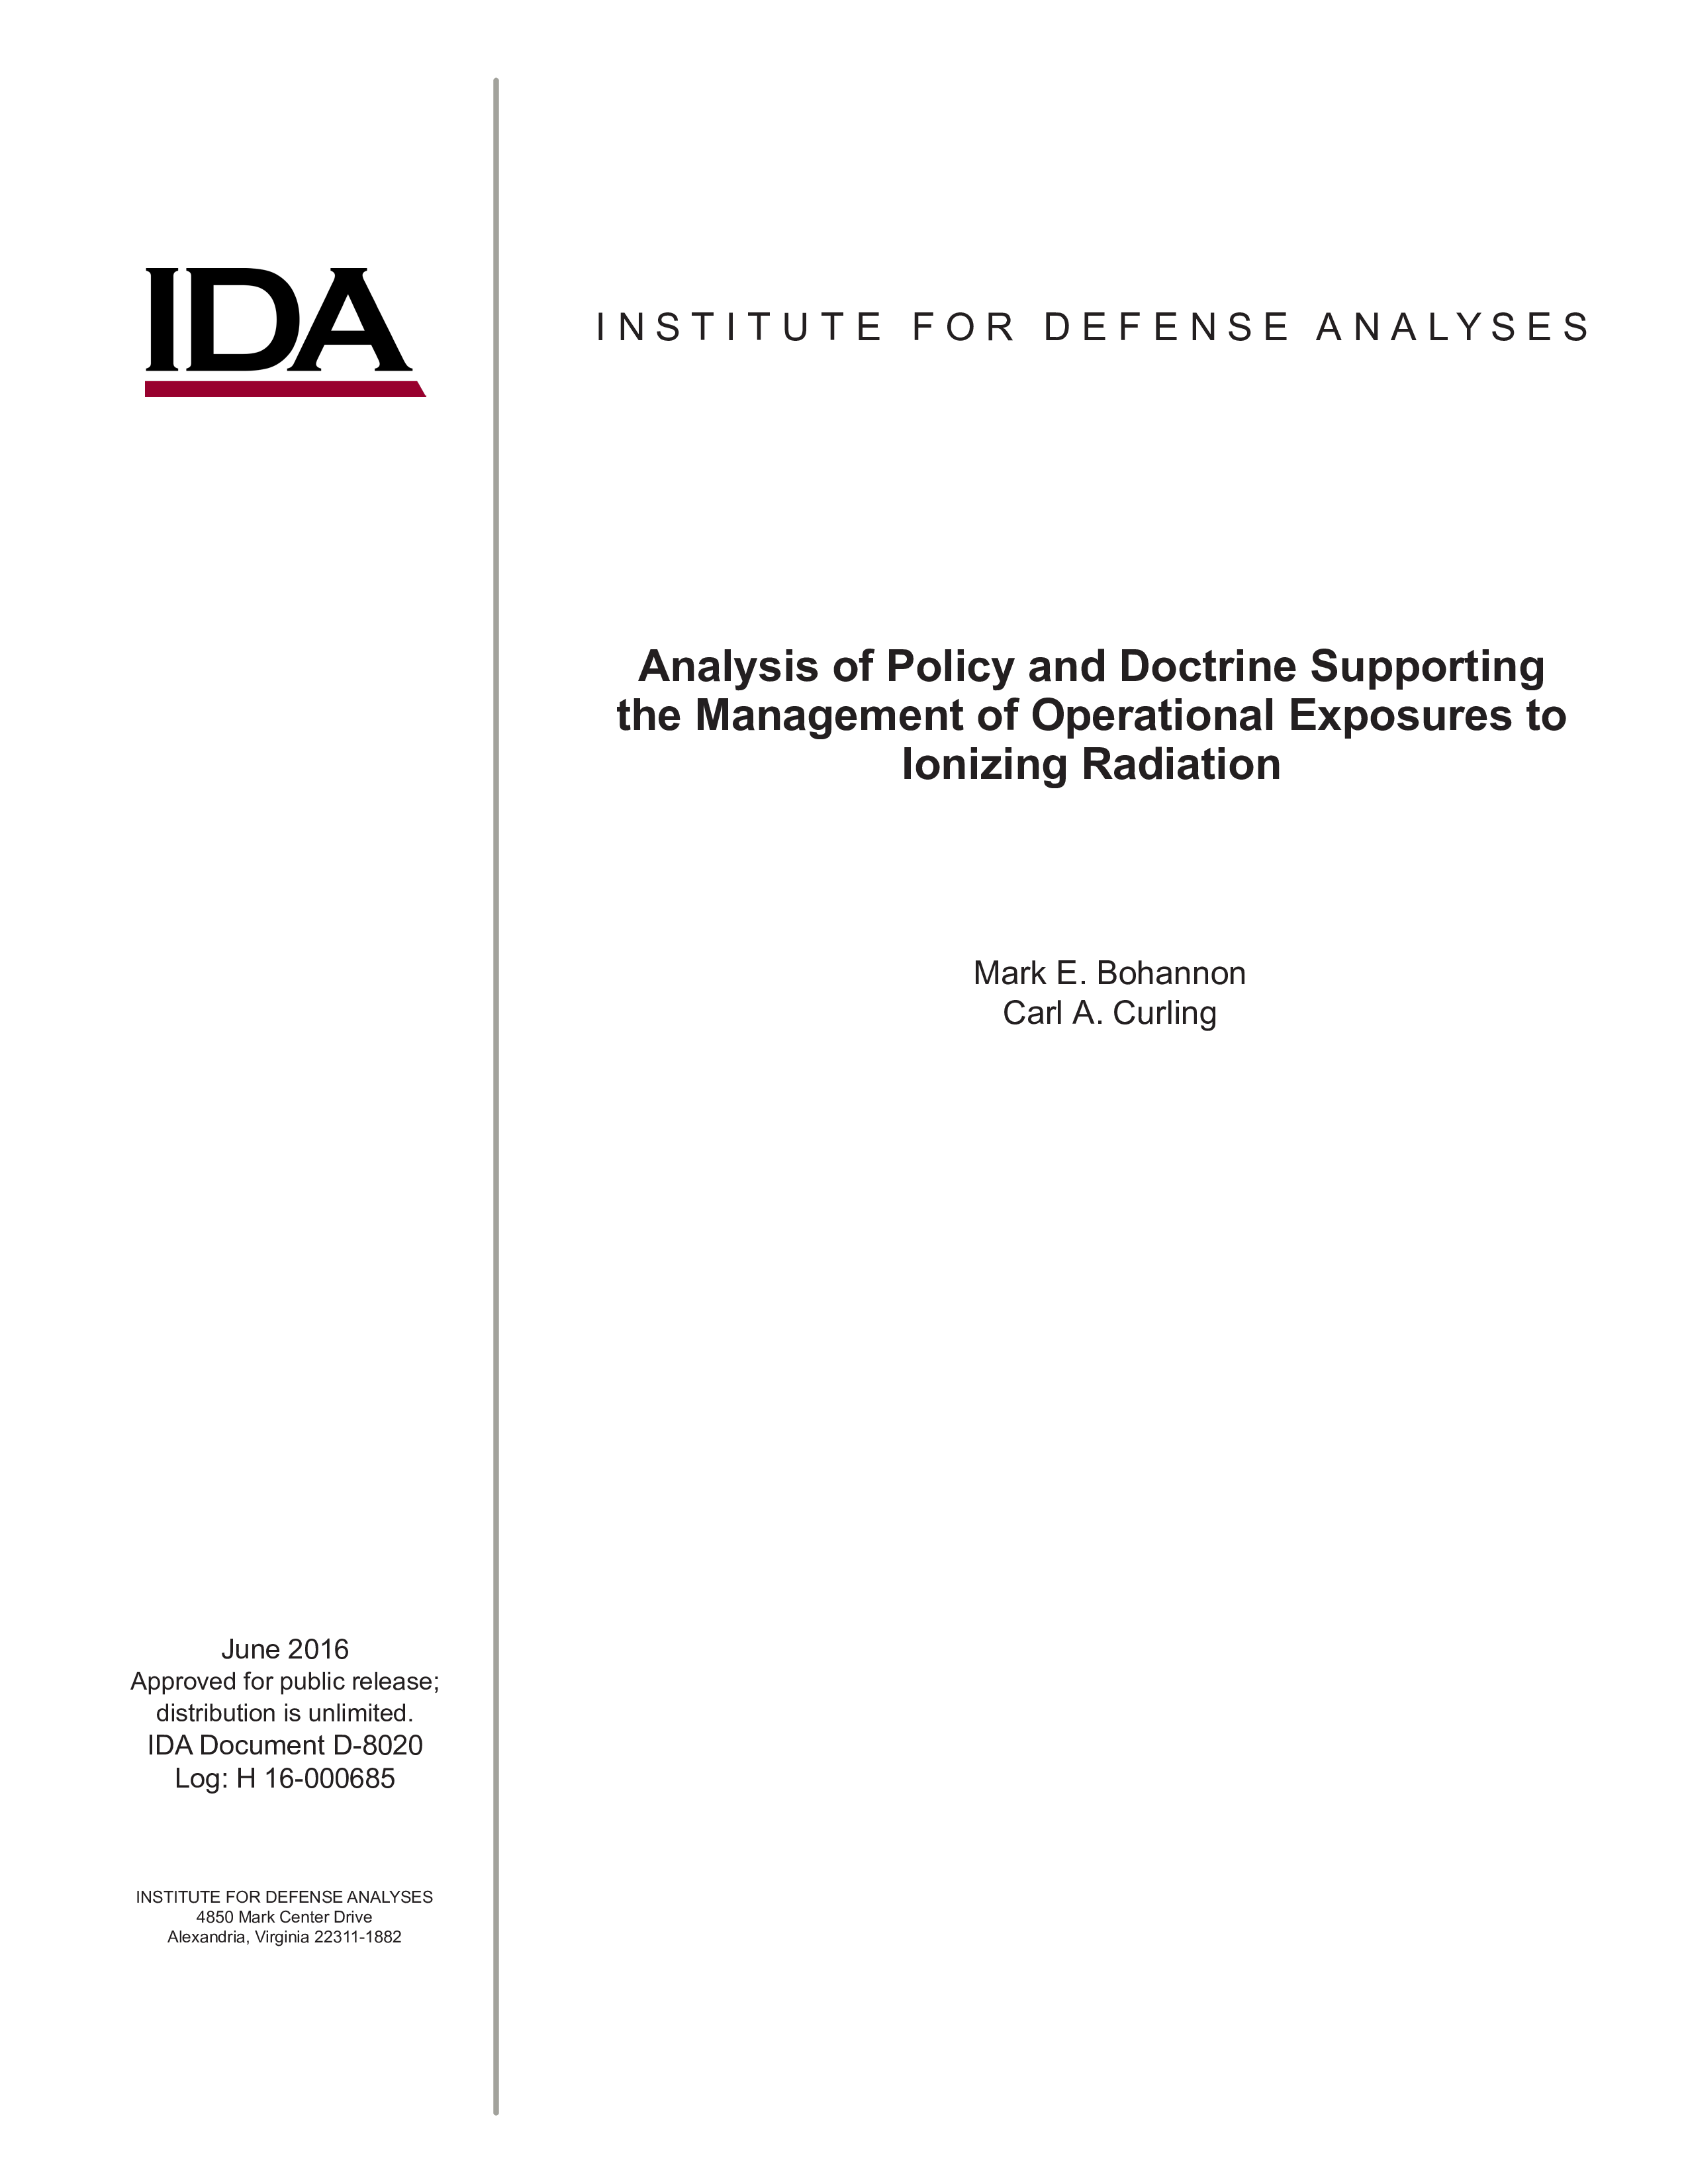 Analysis of Policy and Doctrine Supporting  the Management of Operational Exposures to Ionizing Radiation